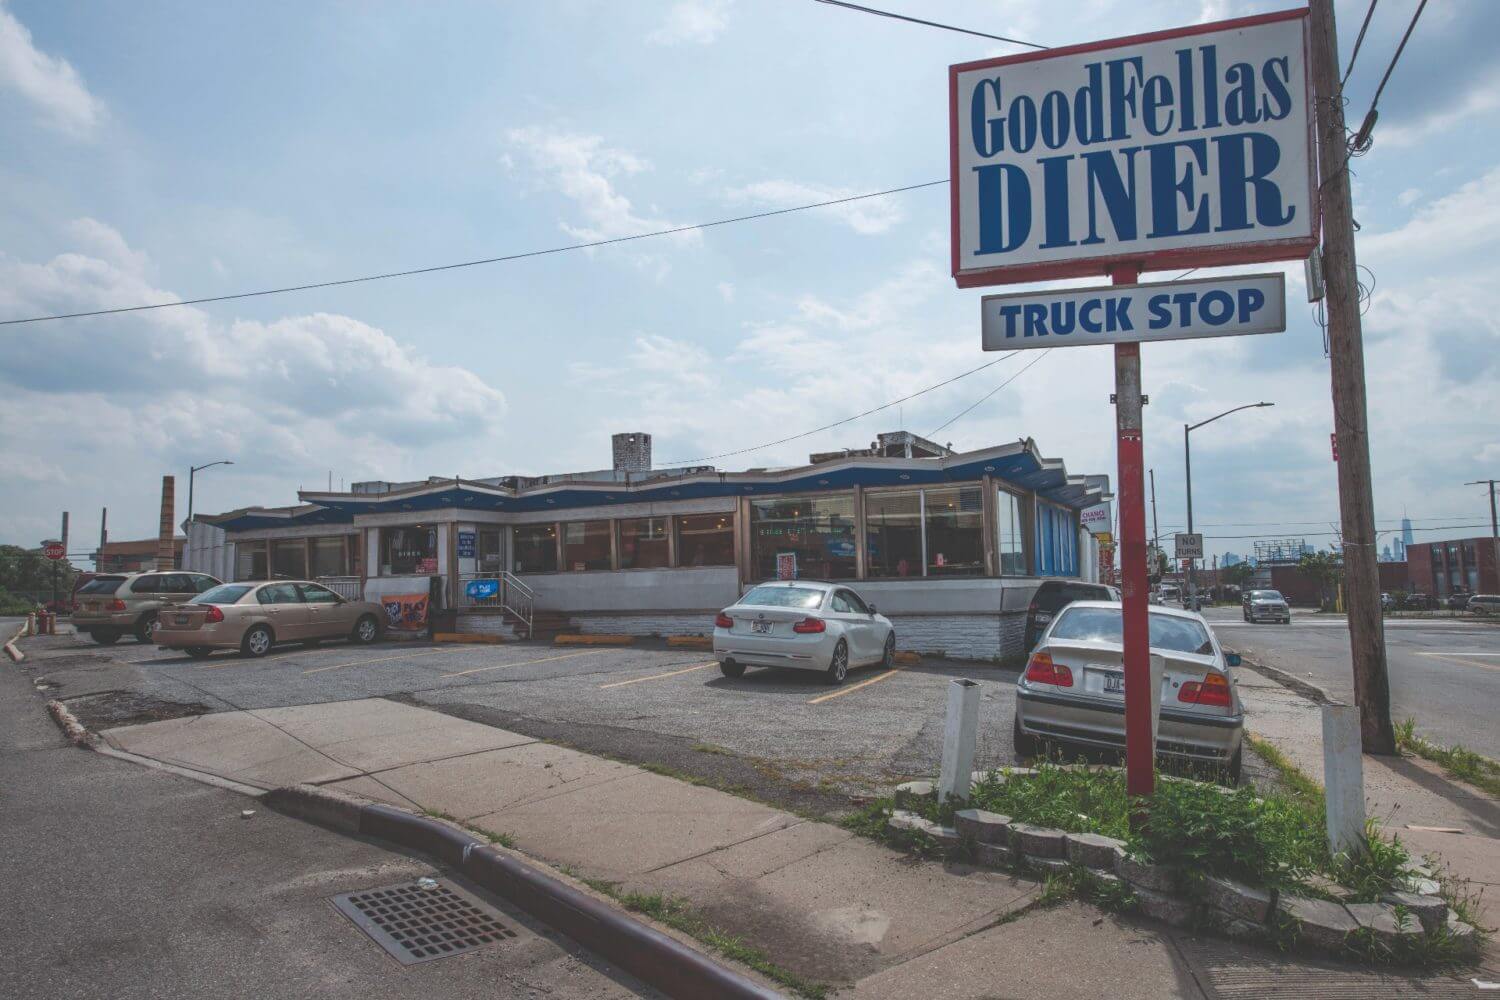 Goodfellas Diner - Photo credit: Fantrippers